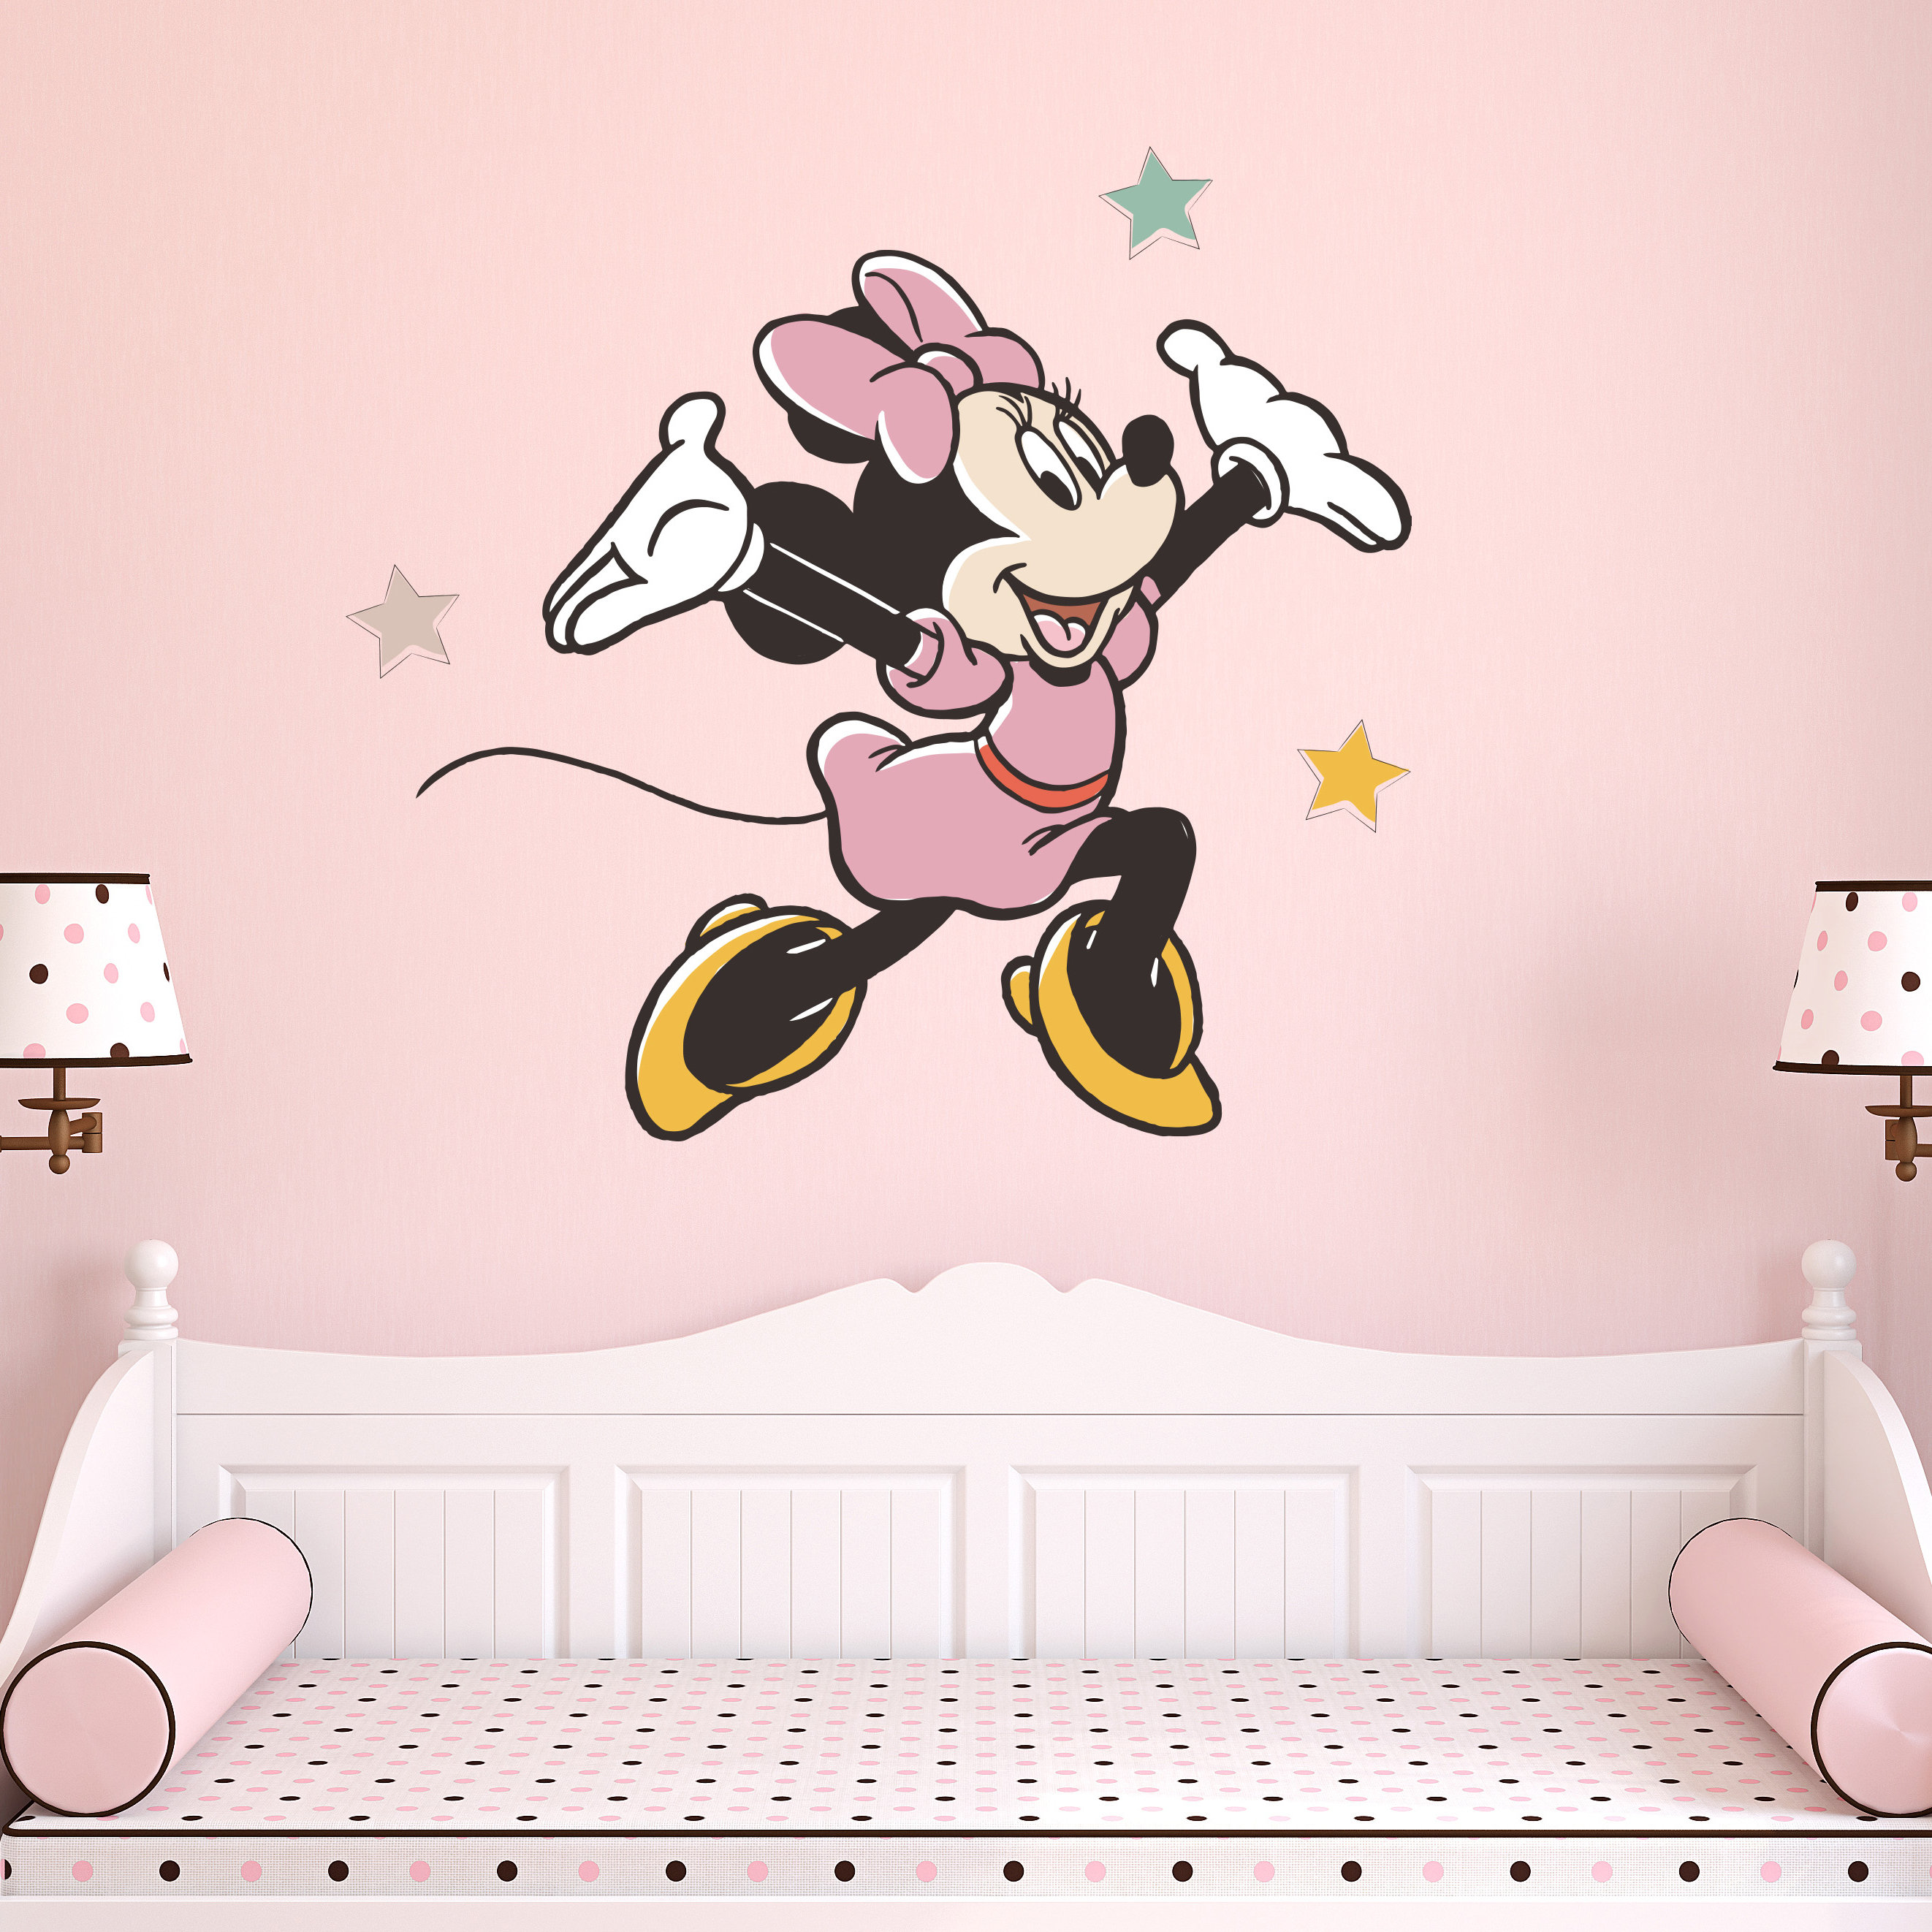 Wall decals cartoon of characters